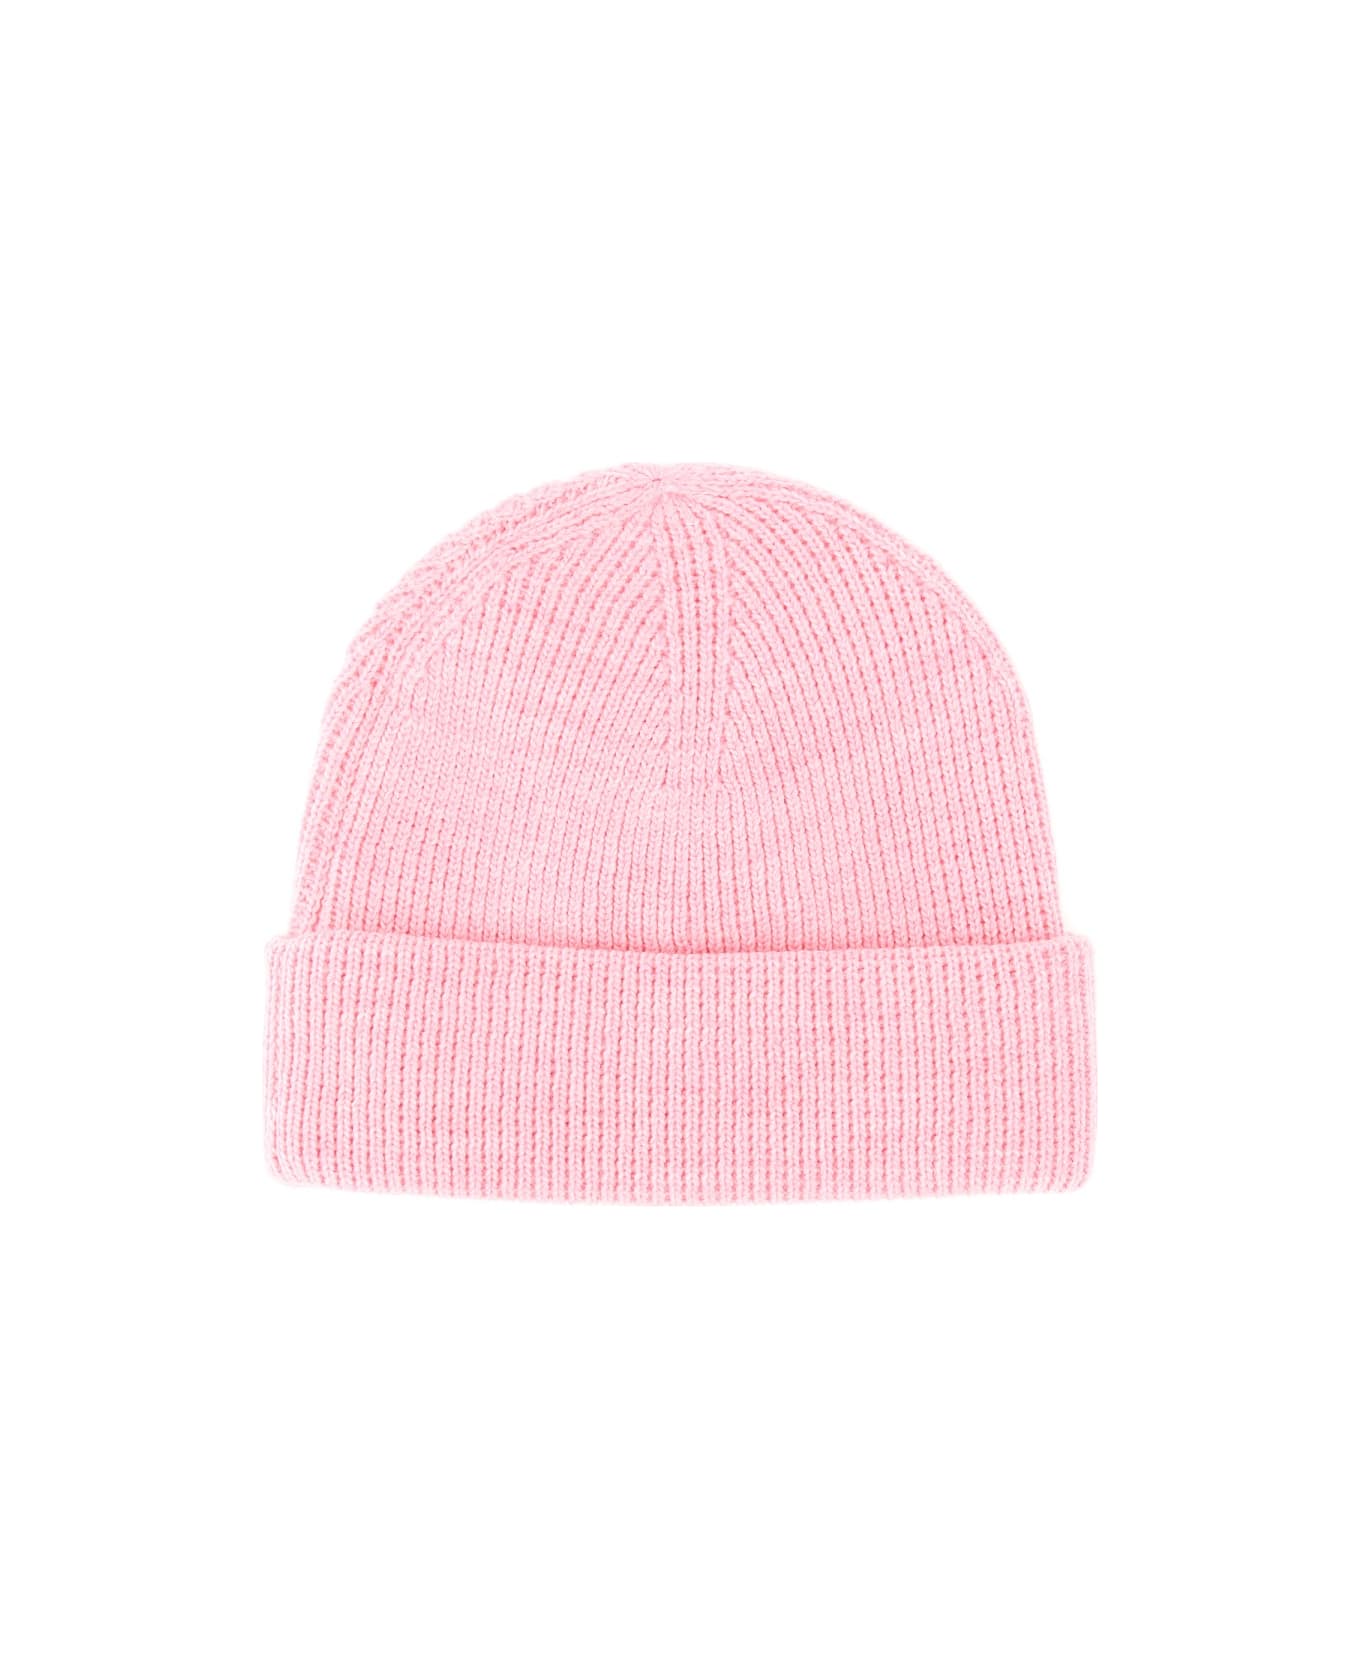 T by Alexander Wang Beanie Hat - PINK